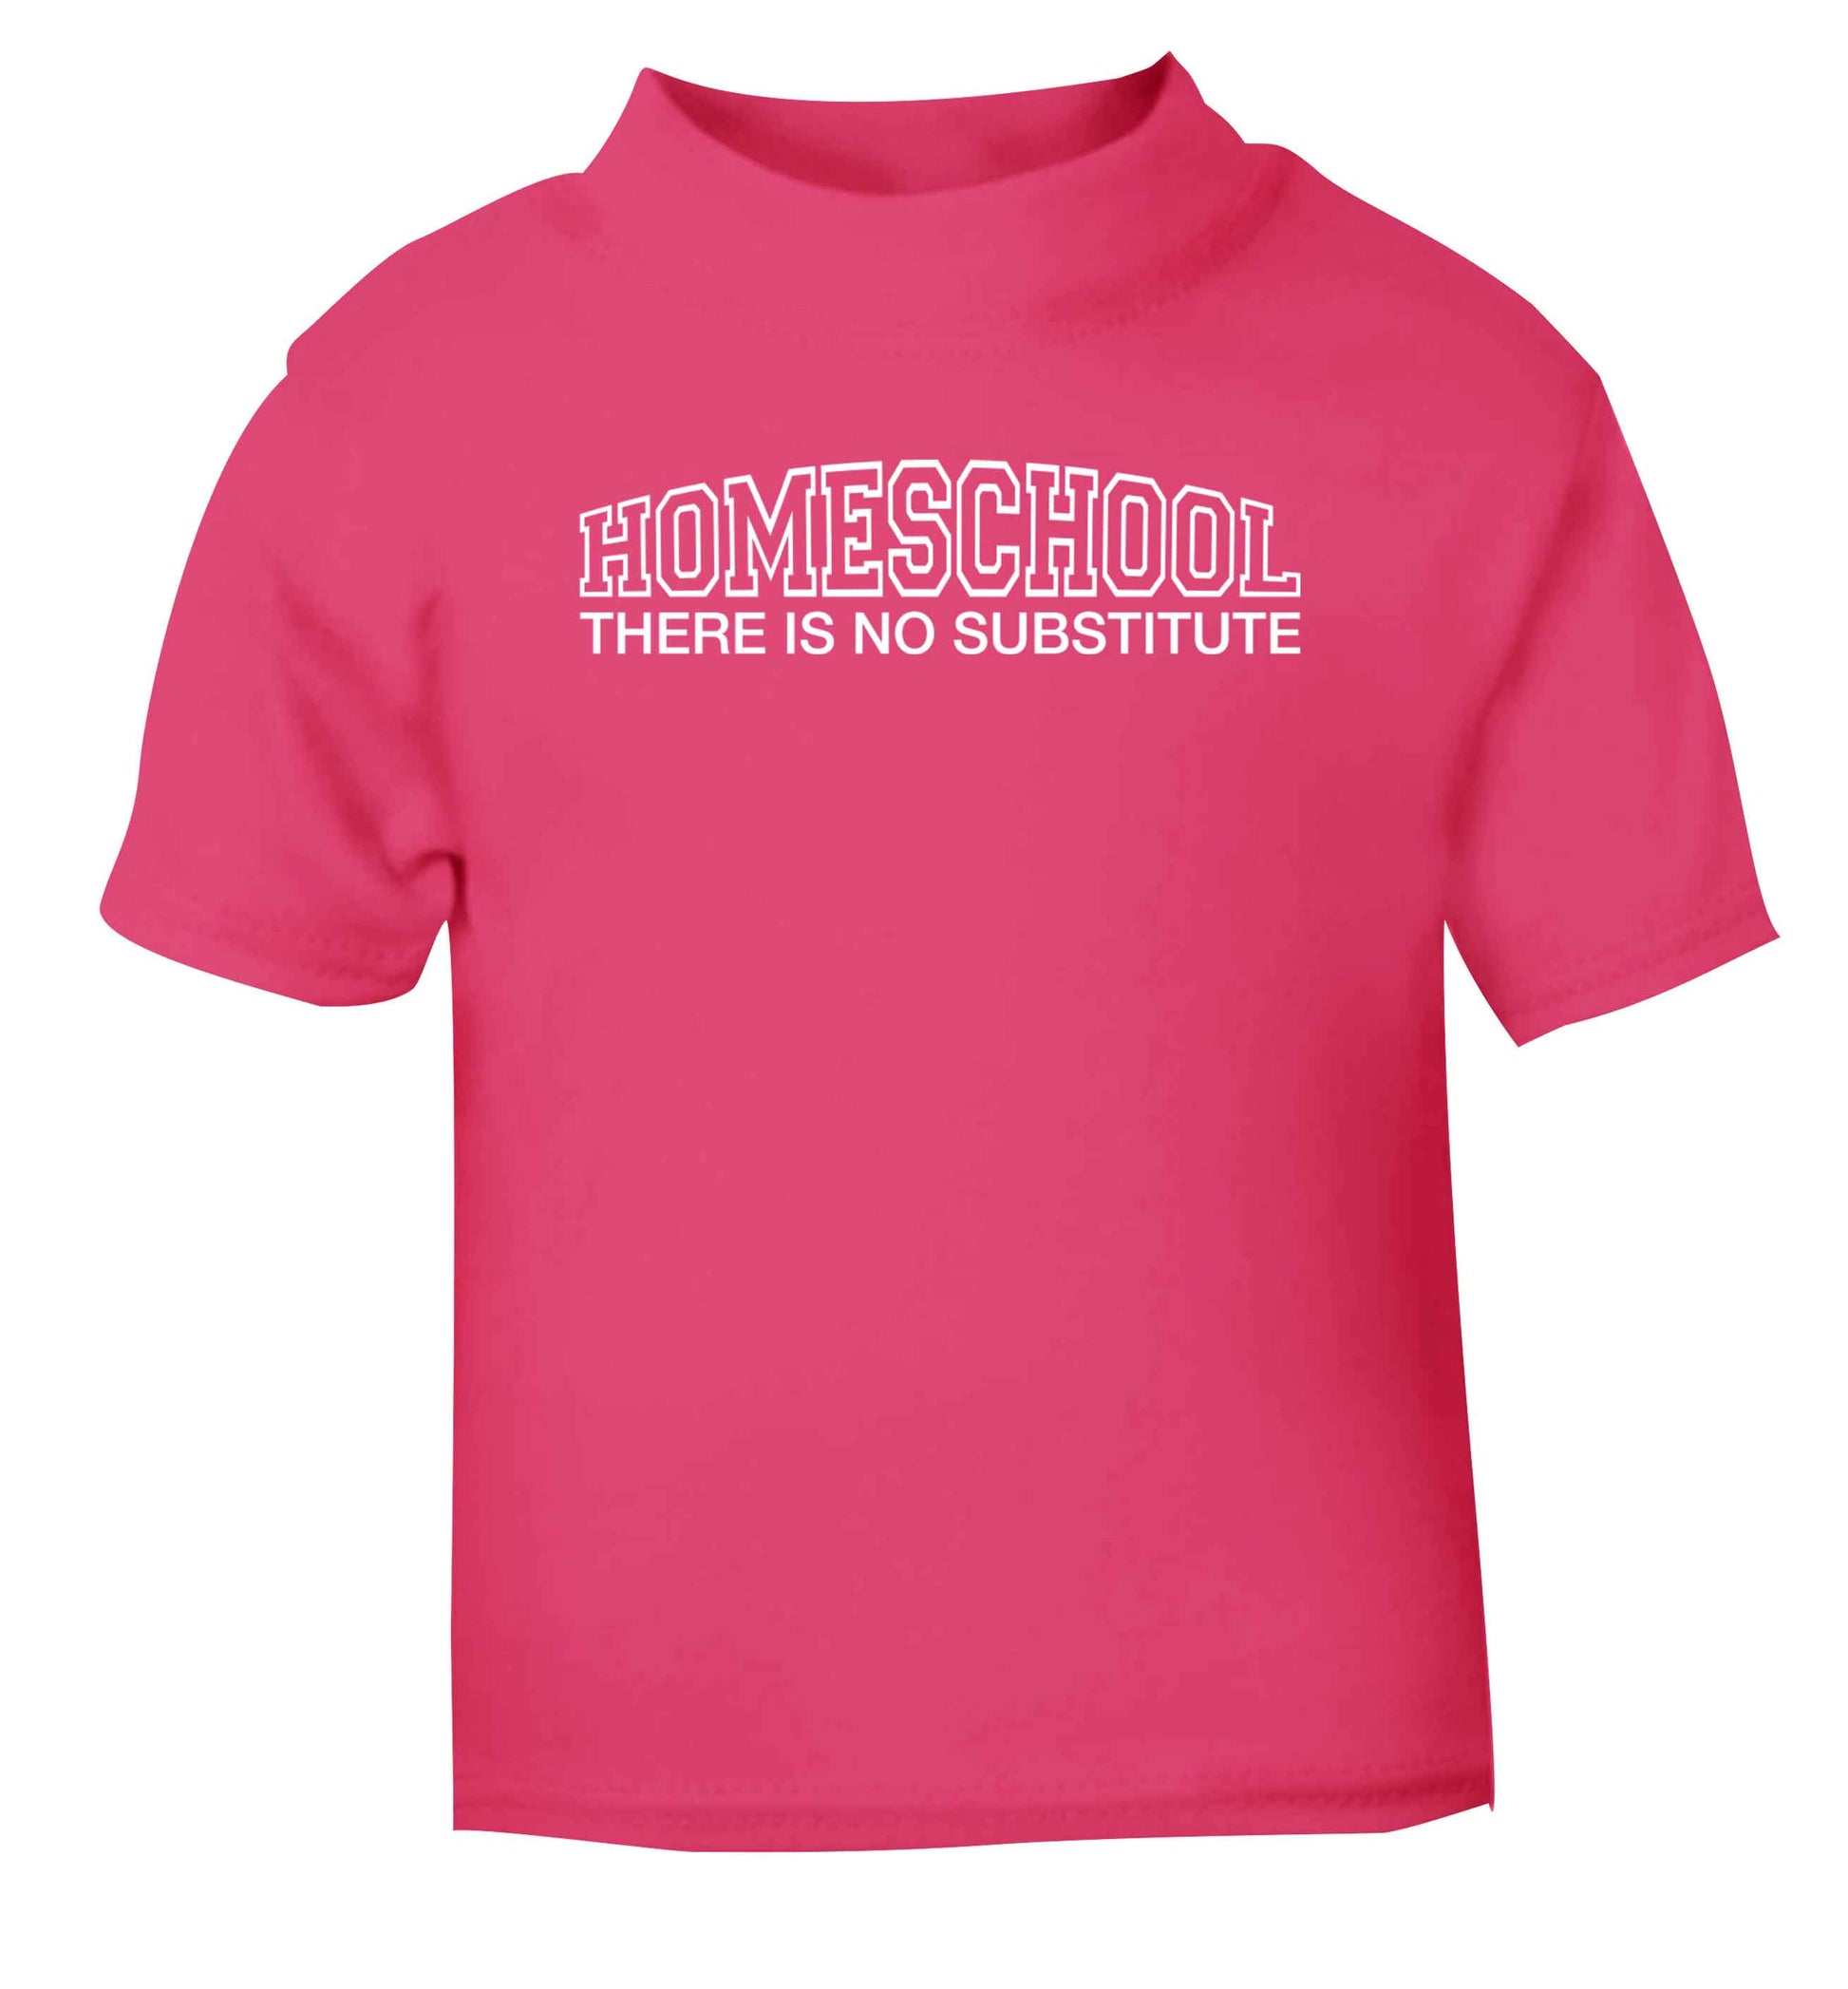 Homeschool there is not substitute pink Baby Toddler Tshirt 2 Years